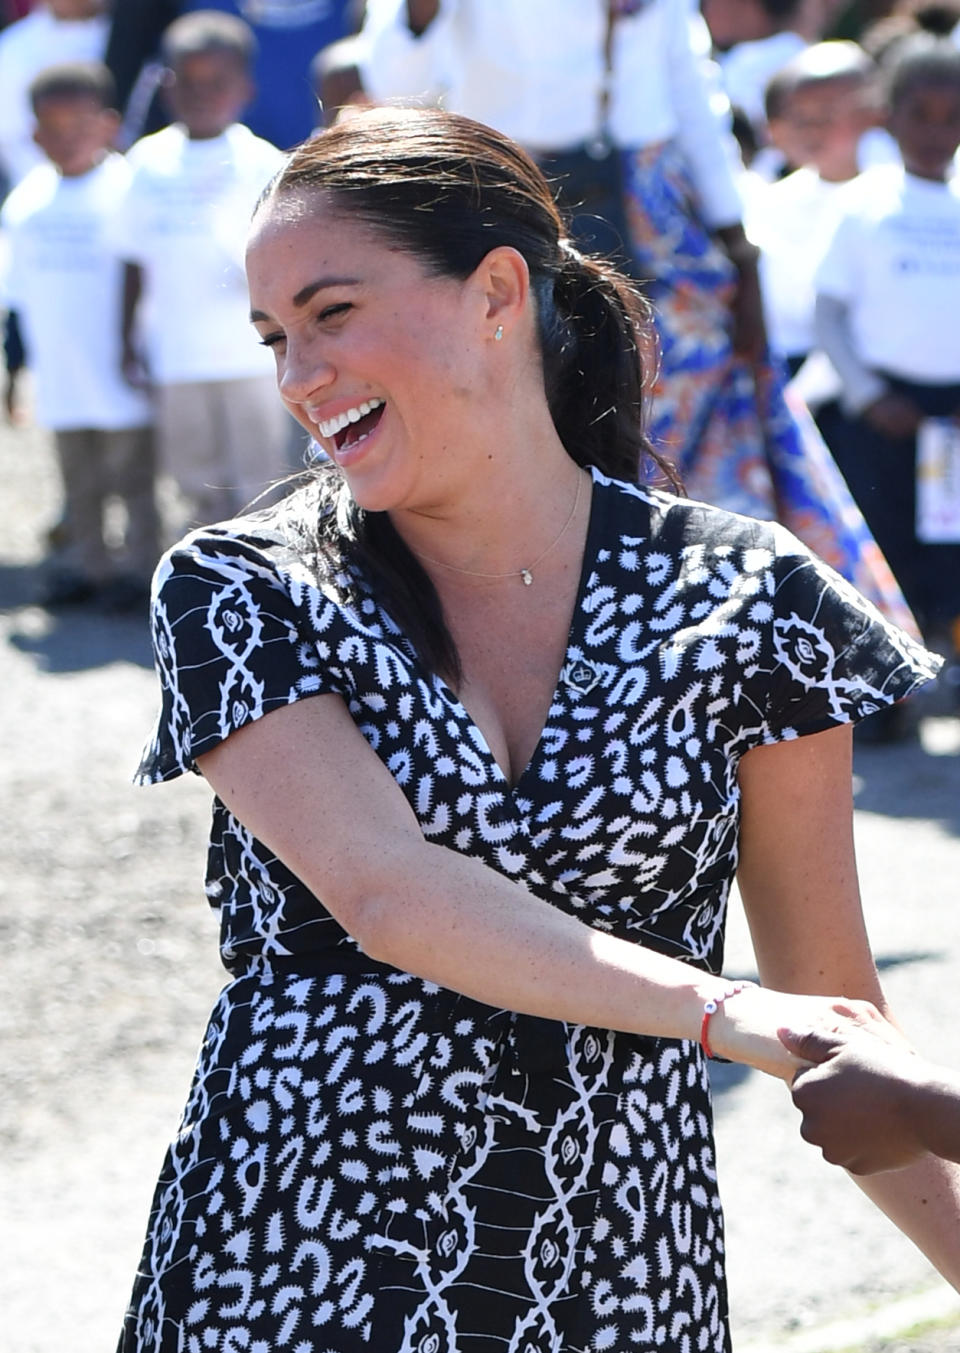 The Duchess of Sussex joins in with dancers as she leaves the Nyanga Township in Cape Town, South Africa, on the first day of their tour of Africa. (Photo by Dominic Lipinski/PA Images via Getty Images)